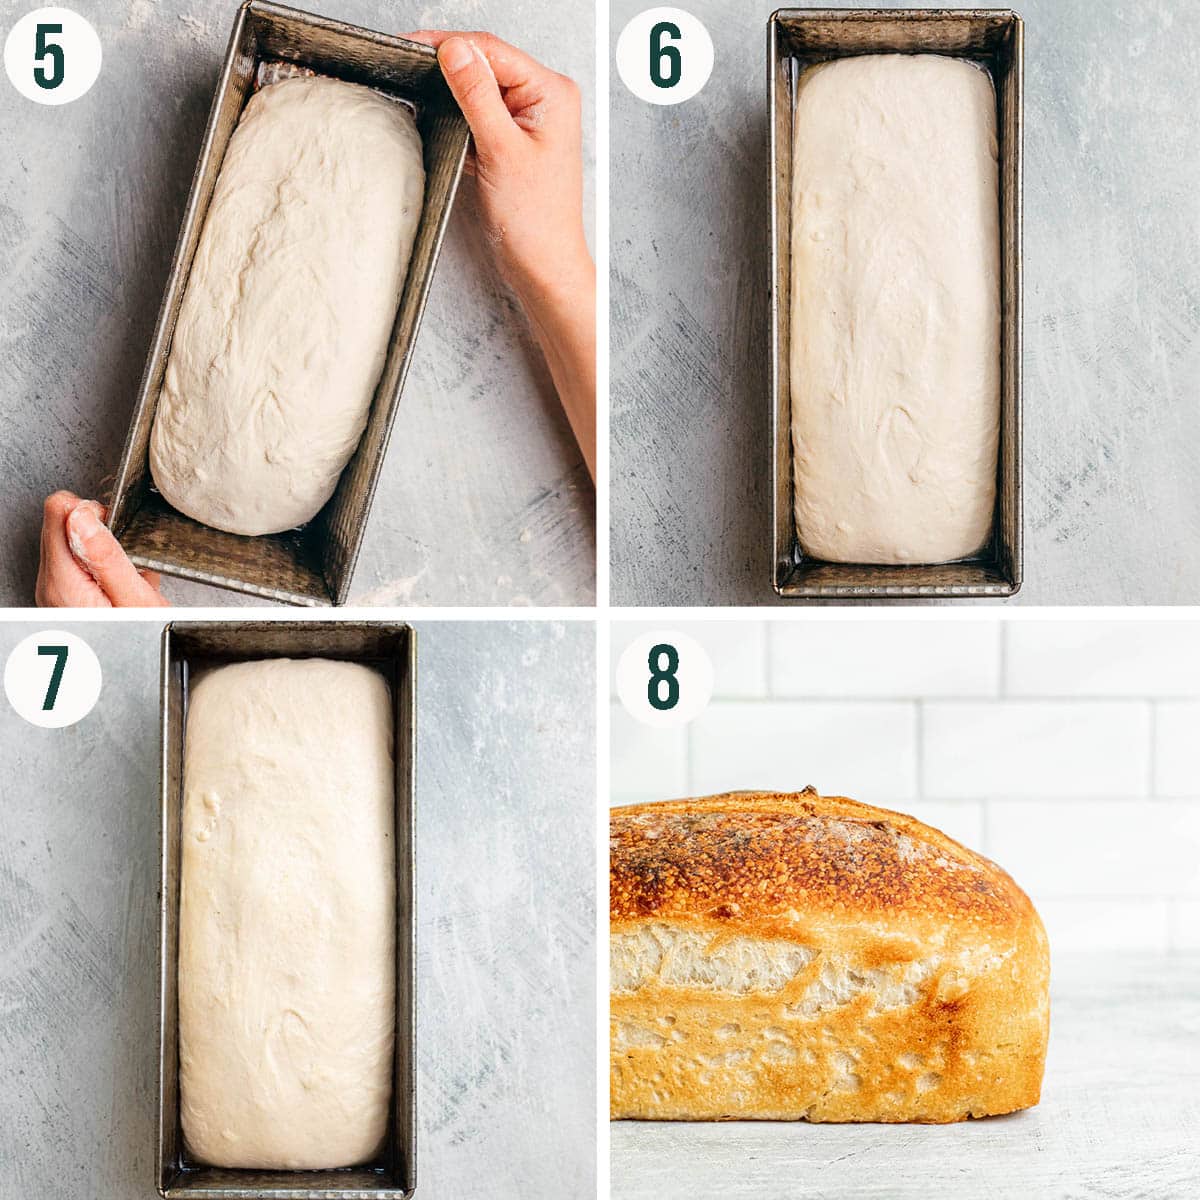 Pan loaf steps 5 to 8, before and after rising, and after baking.